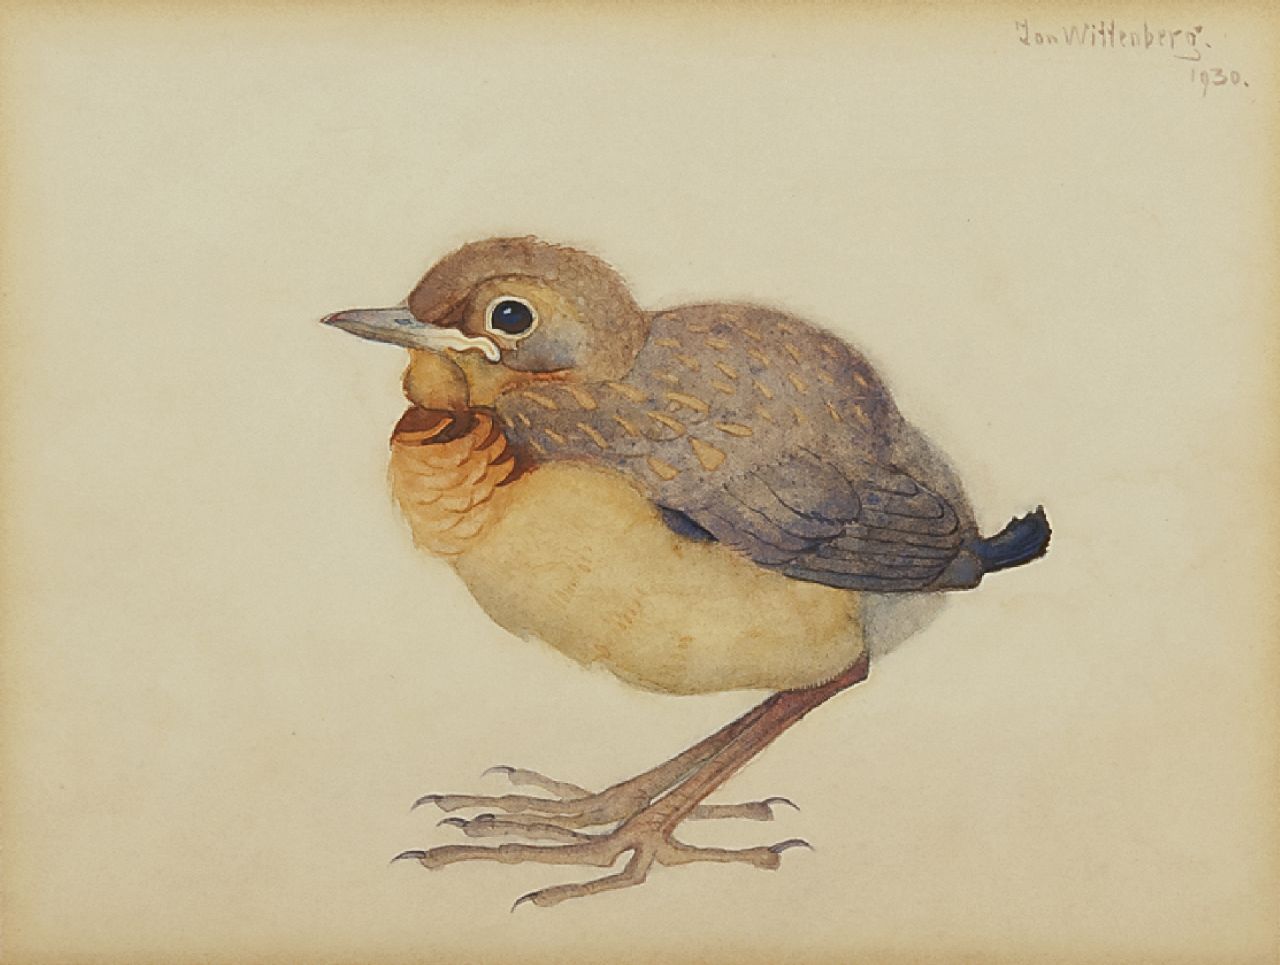 Wittenberg J.H.W.  | 'Jan' Hendrik Willem Wittenberg, A young blackbird, watercolour on paper 13.3 x 18.3 cm, signed u.r. and dated 1930